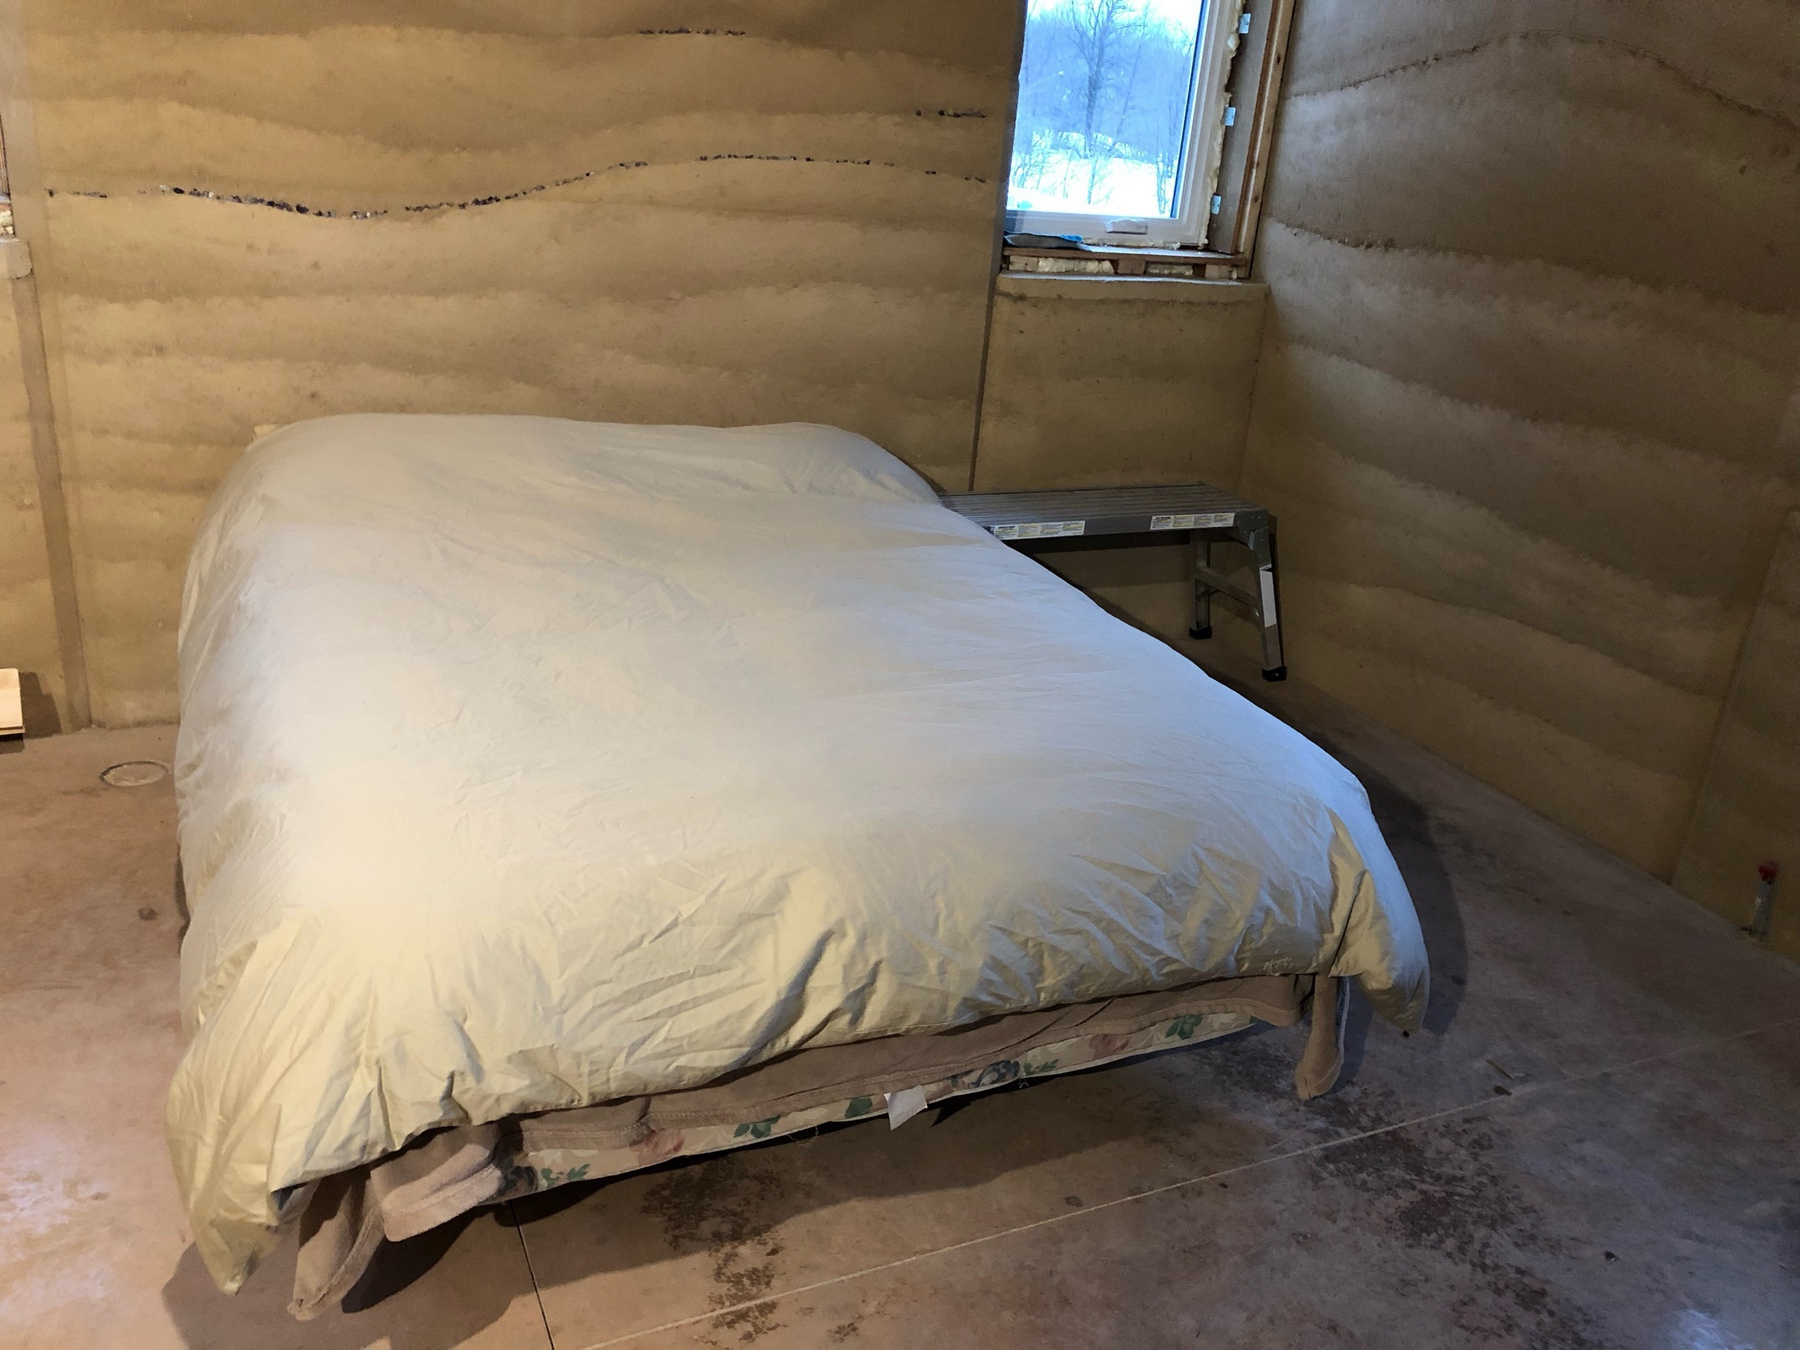 a bed in a room with gold, wavy walls. there is a window in the corner